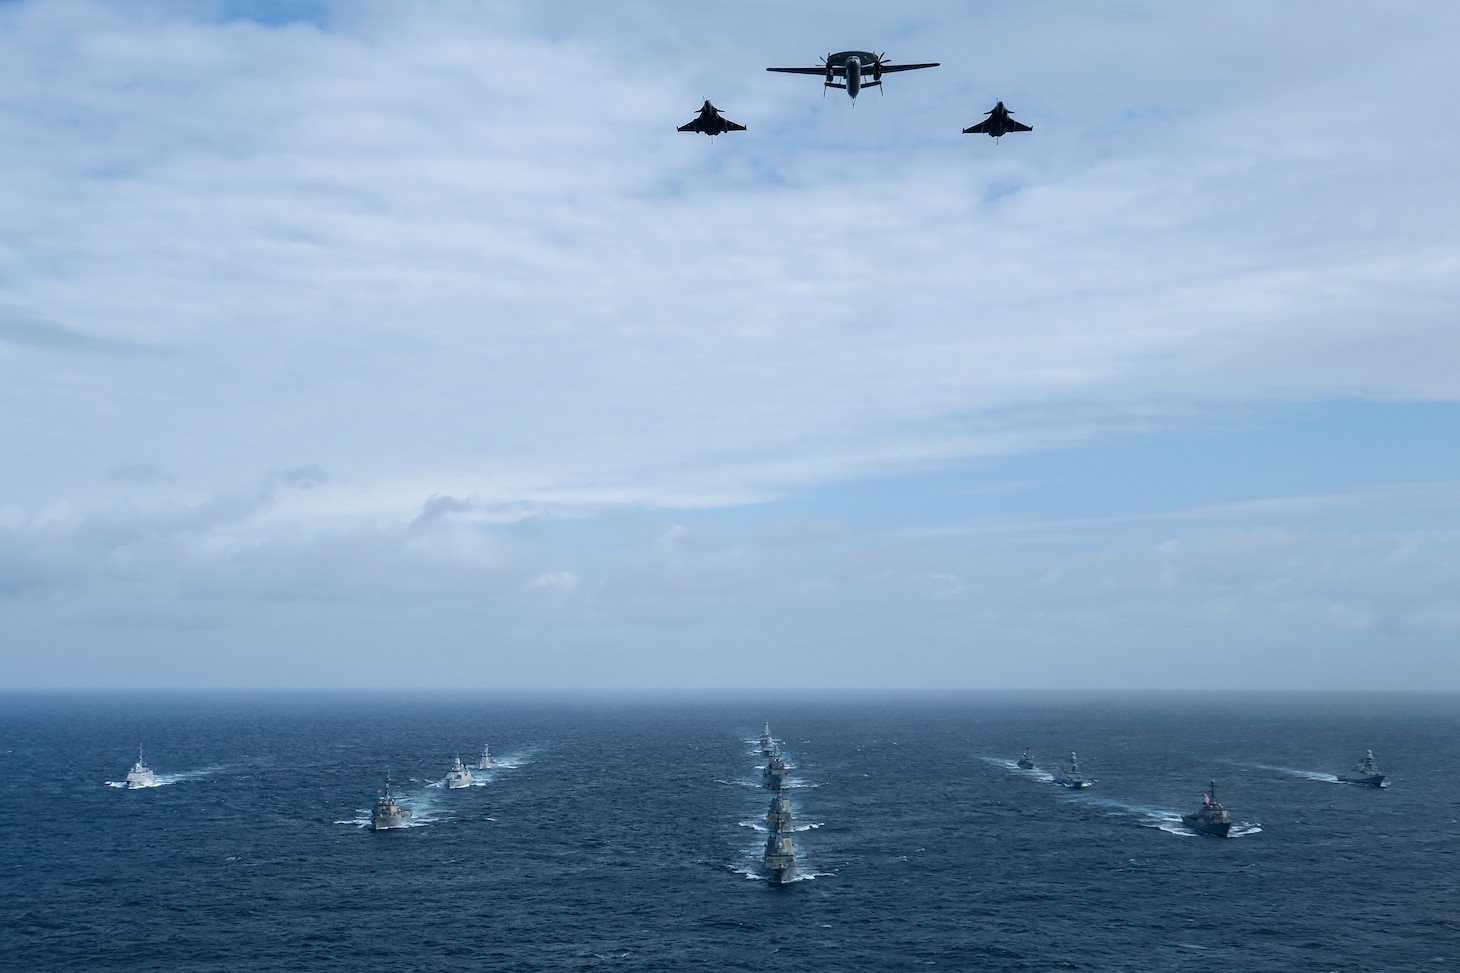 NATO Ship Formation for PHOTEX

As seen from on board HMS Defender, NATO ships form up in order to conduct a PHOTEX including a fly-over by the French Air Force during Formidable Shield 23 in the North Atlantic.

Formidable Shield is a NATO joint exercise with 2023 seeing allied fleets working together in the North Atlantic from the United States, Canada, France, Netherlands, Italy and the UK. 

HMS Defender is a type 45 destroyer air defence ship. Defender and her crew have been engaged on operations over the past 3 years, covering 4 major Oceans and most of the world's seas. Assisted by her Wildcat helicopter from 815 Naval Air Squadron, the Portsmouth based destroyer will shortly be conducting NATO's major Formidable Shield 23 exercise in the North Atlantic, where the ship ship will work with the UK's allies showcasing the Type 45 destroyer as one of the world's best air defence ships.

Photographer: SLt Henry McCarthy